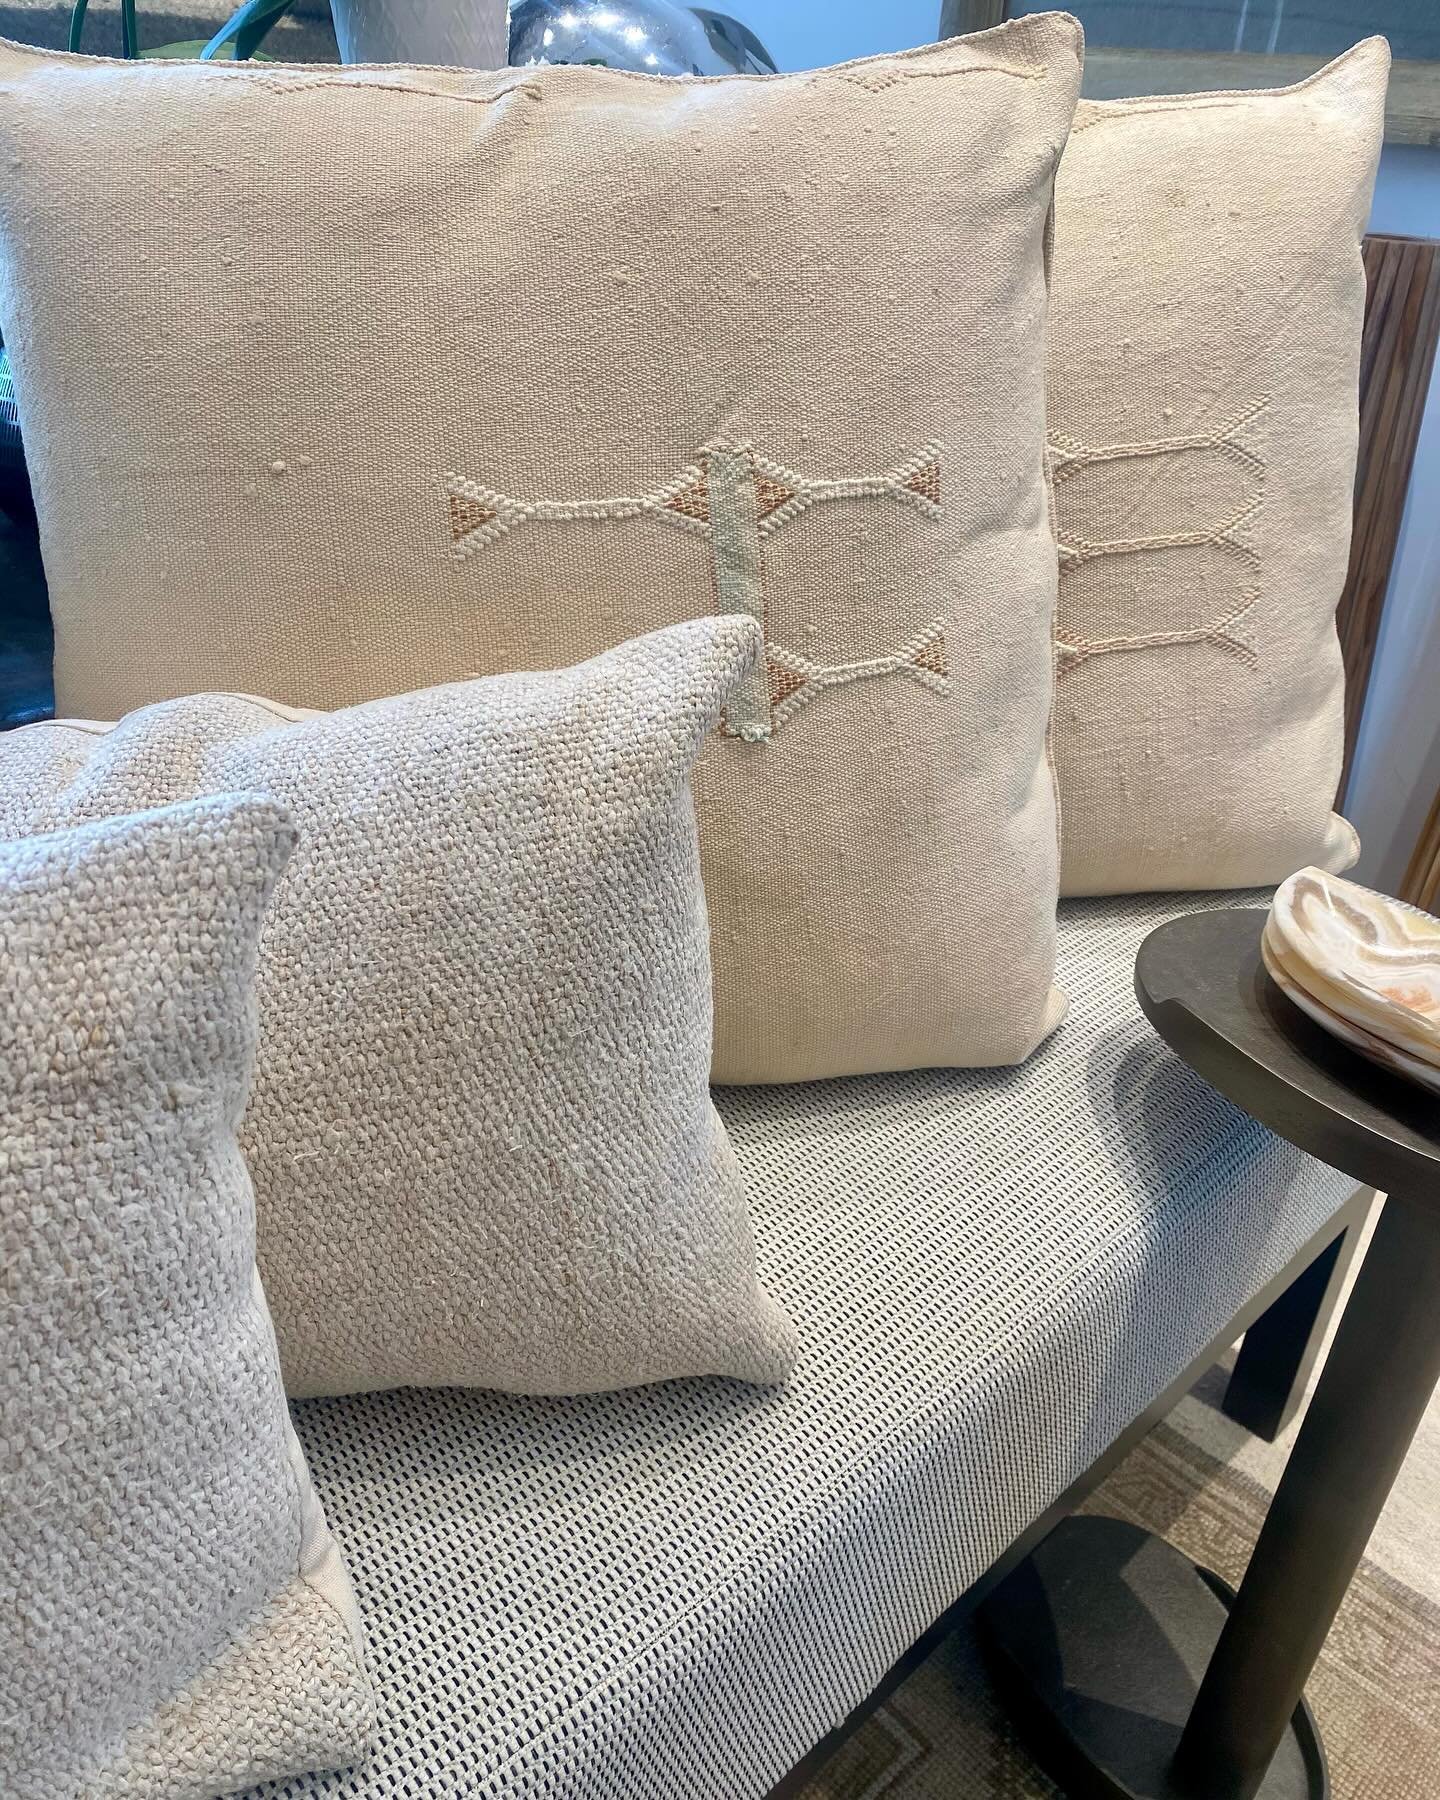 More one of a kind finds from High Point 🤩
.
.
.
#cactuskilim #oneofakind #uniquefinds #hpmarket #pillows #interiordecor #interiordesign #interiorphilosophy #interiorphilosophyatl #atlantadesigner